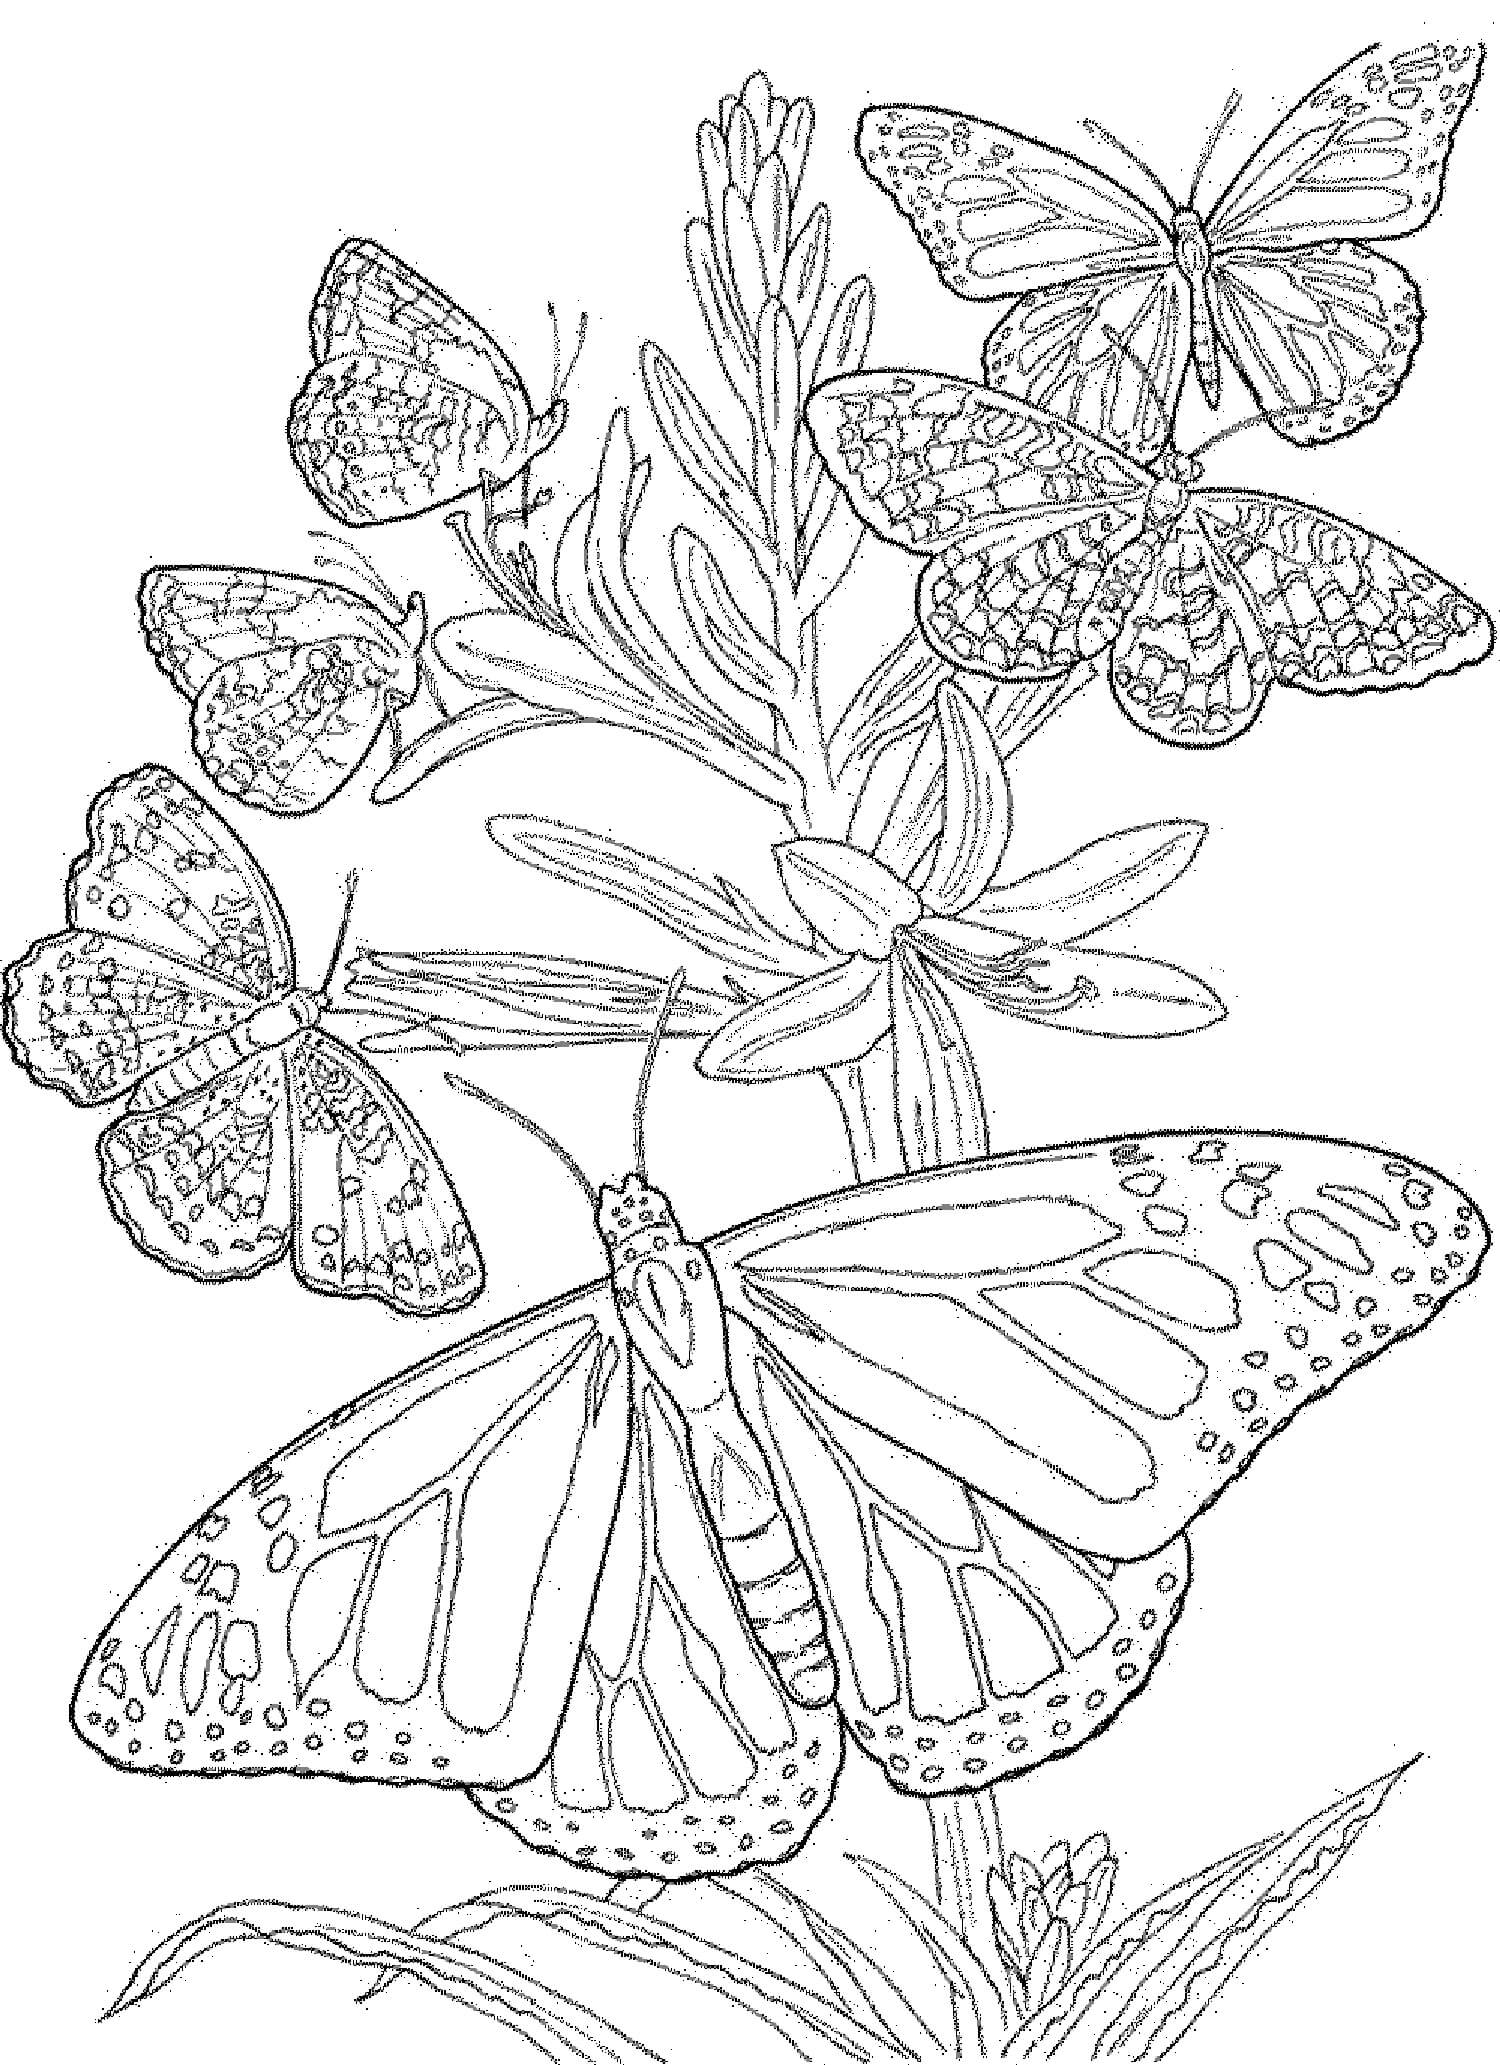 Butterflies Mandala coloring page - Download, Print or Color Online for ...